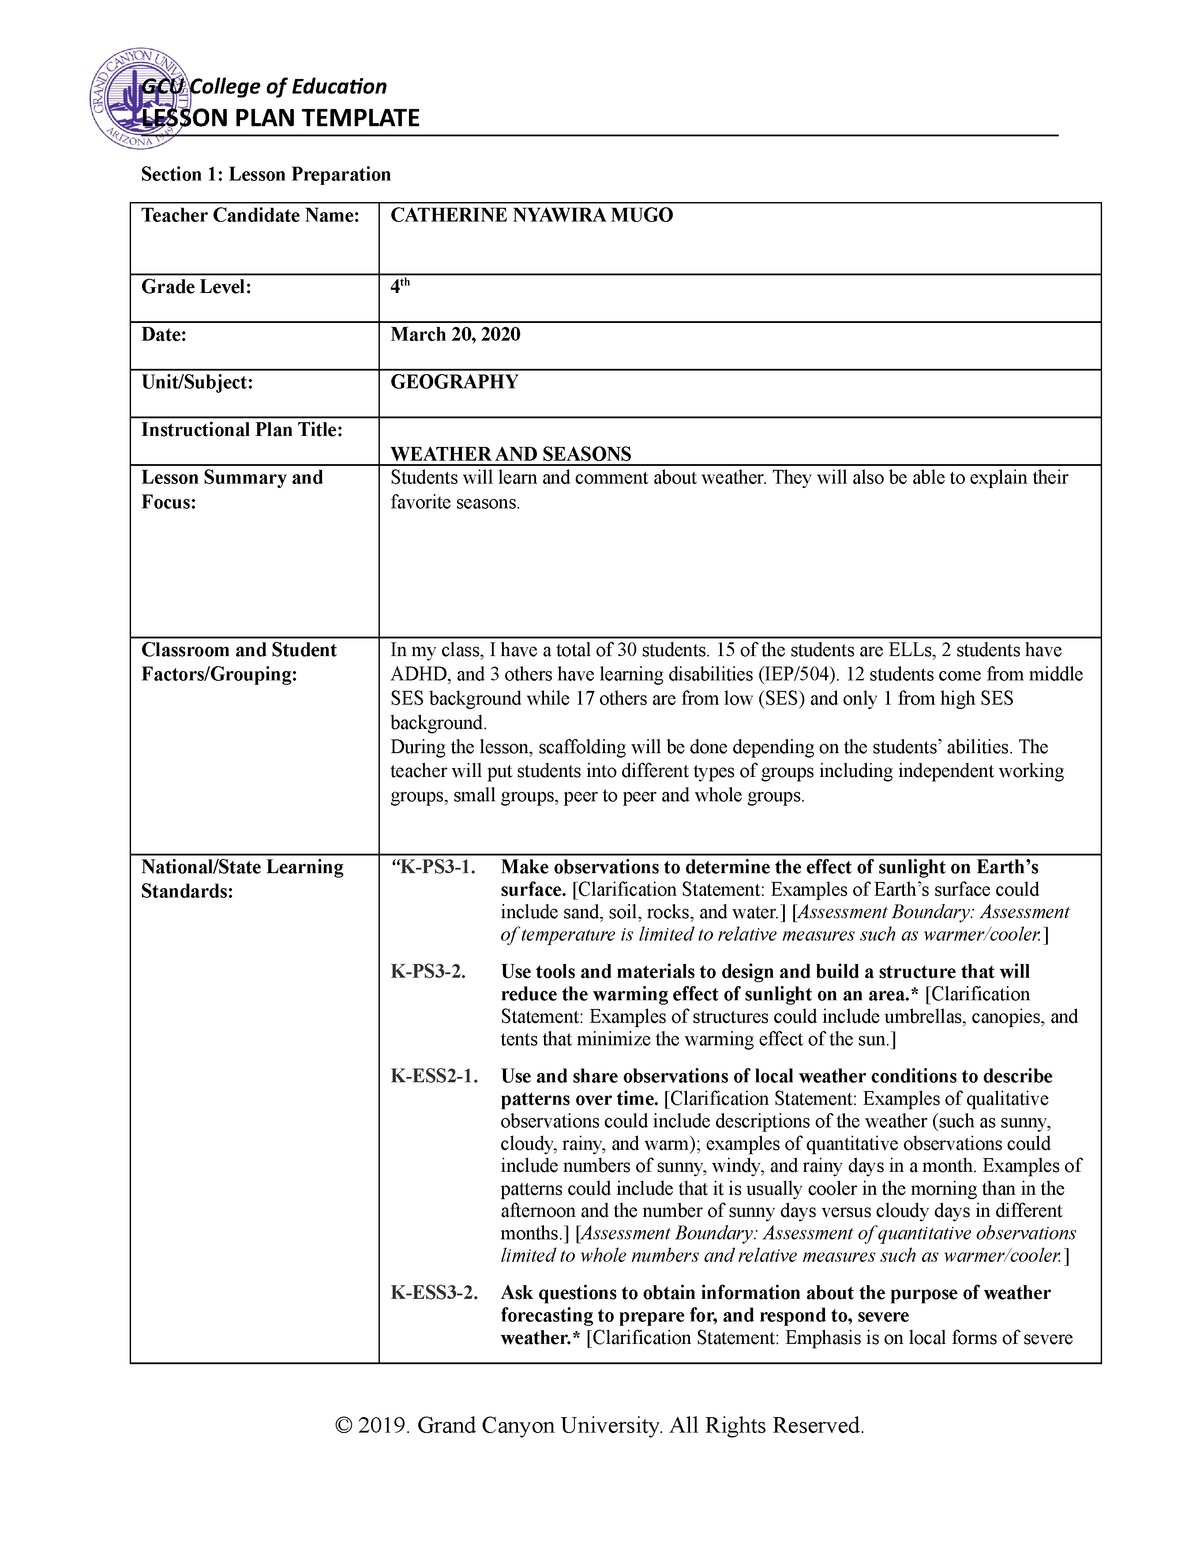 Coe Lesson Plan Template Lesson Plan Template Section Lesson Preparation Teacher Candidate Name Catherine Nyawira Mugo Grade Level Th Date March 20 2020 Unit Studocu